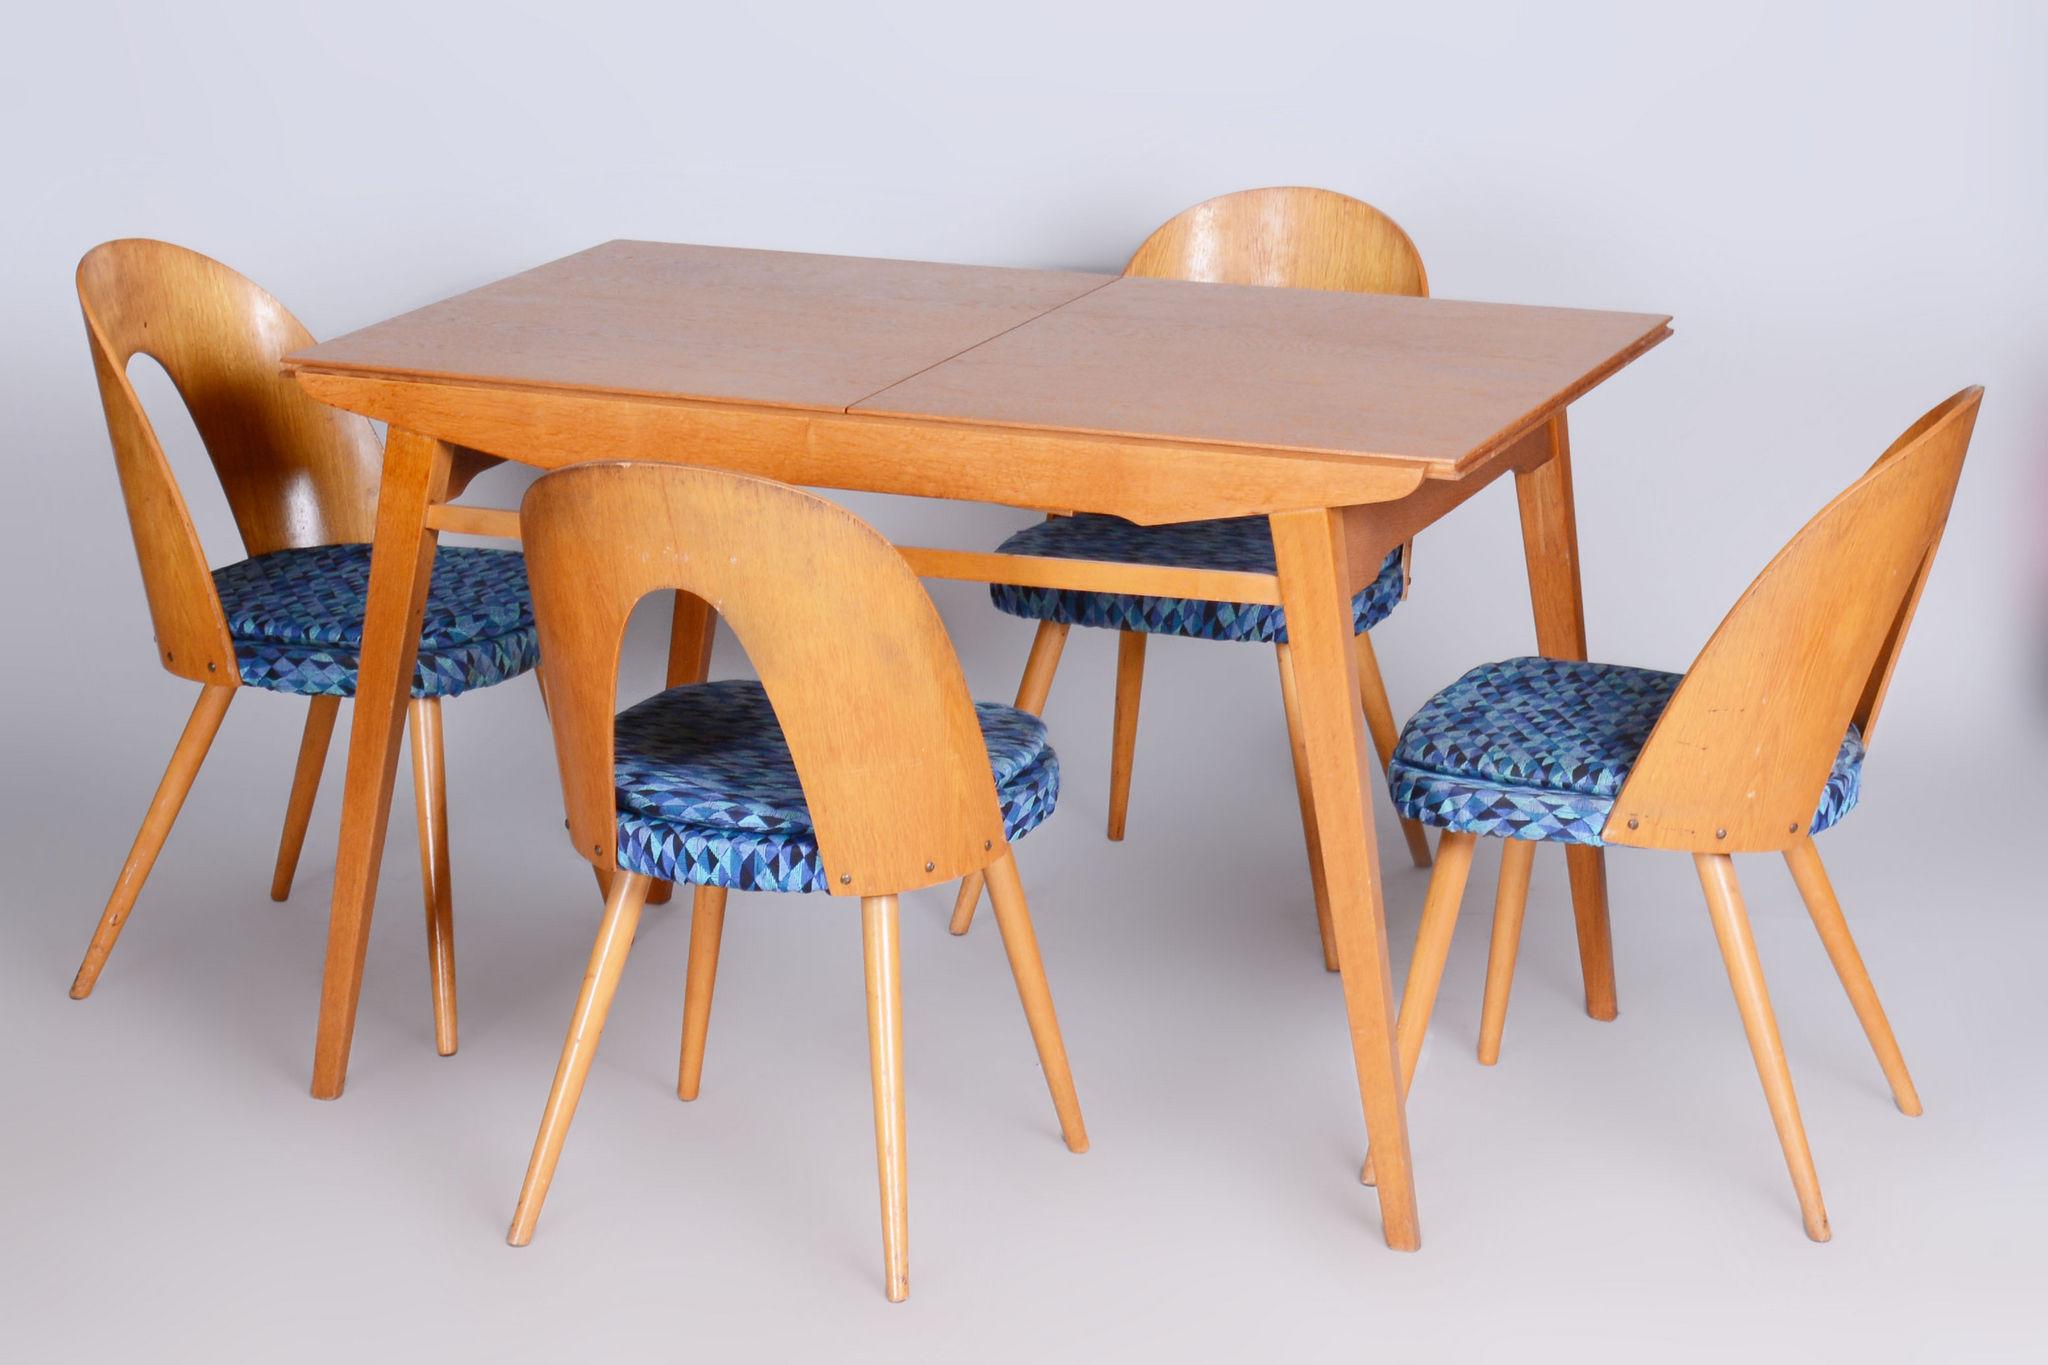 Restored Midcentury Oak Extendable Dining Table, Revived Polish, Czechia, 1950s In Good Condition For Sale In Horomerice, CZ